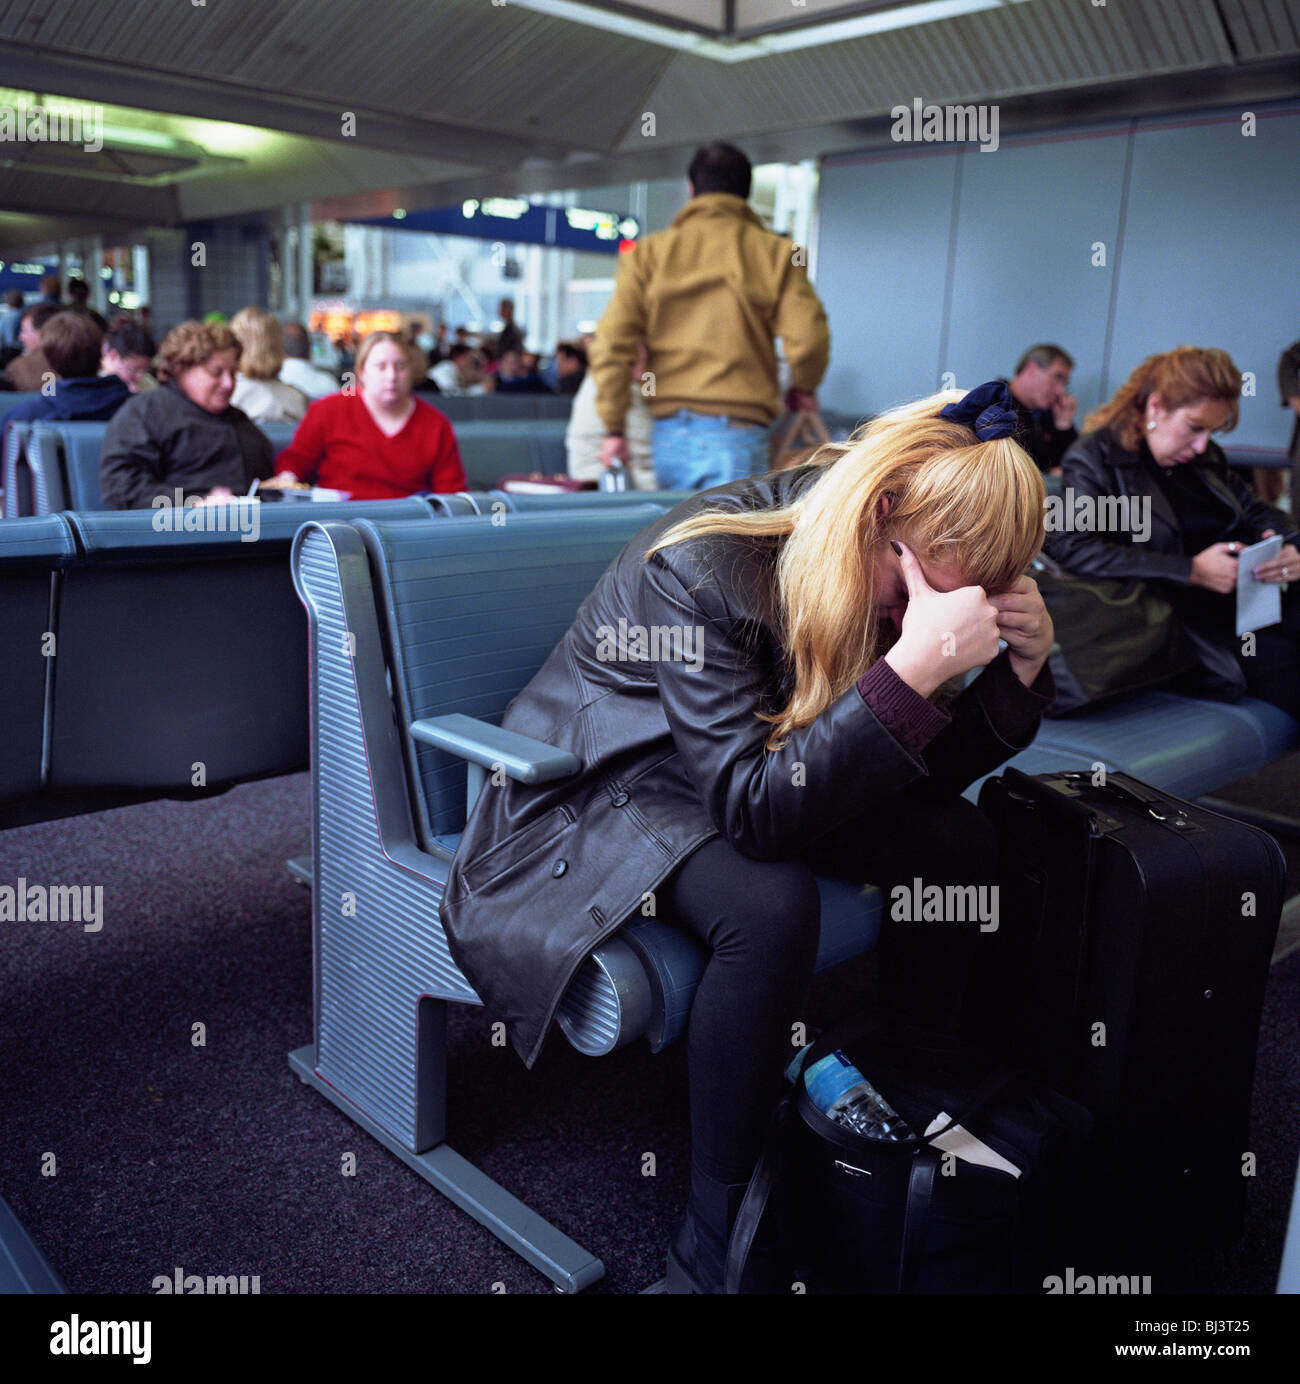 A female passenger leans forward with head in hands amid the busy terminal at Chicago O'Hare Airport. Stock Photo